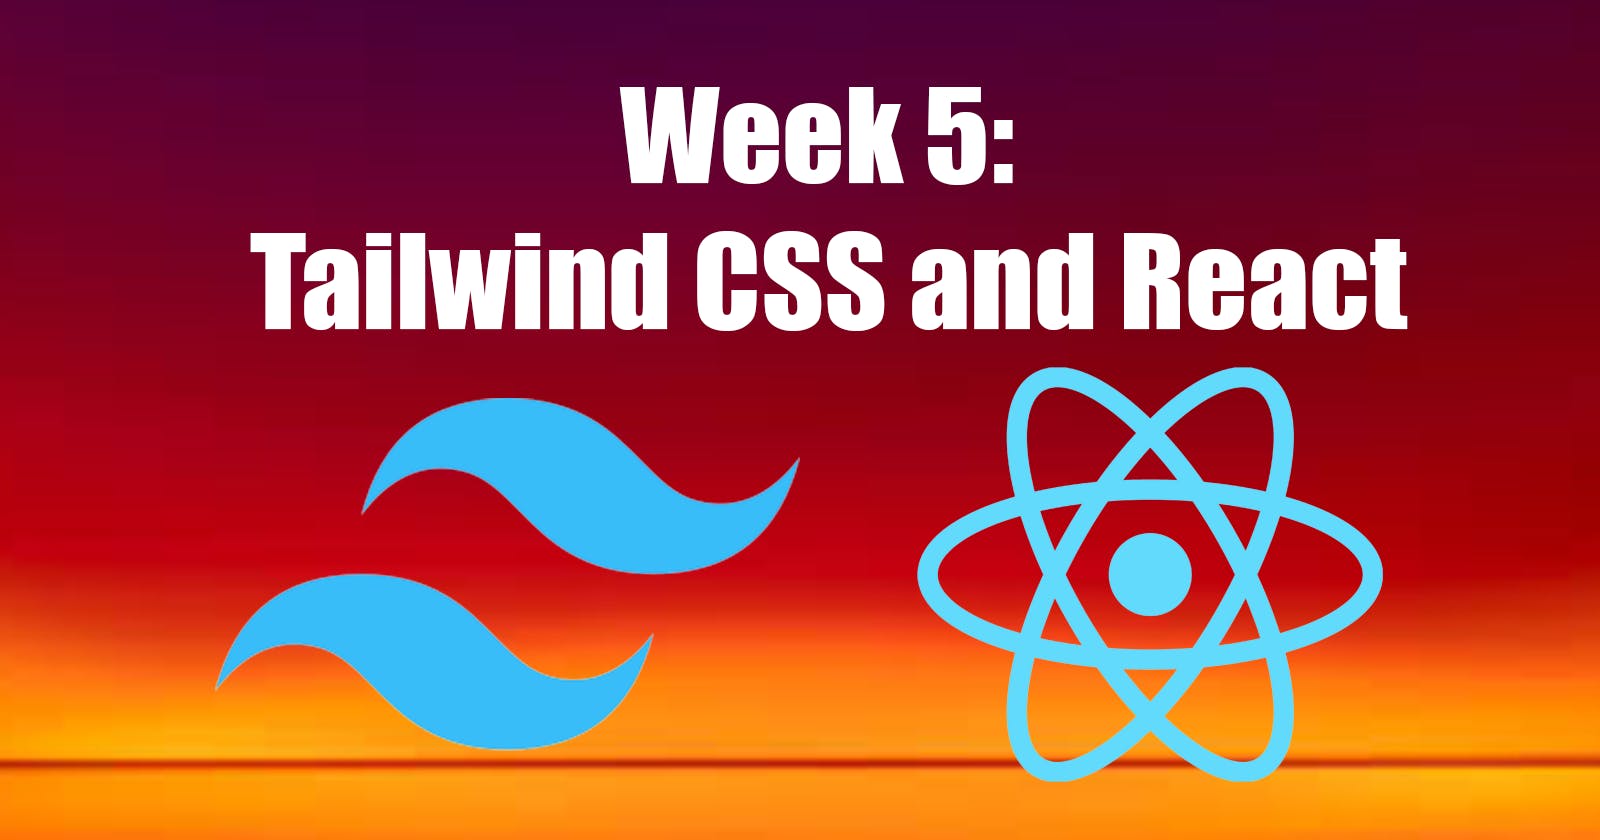 Journey to Fullstack - Week 5: Tailwind CSS and React